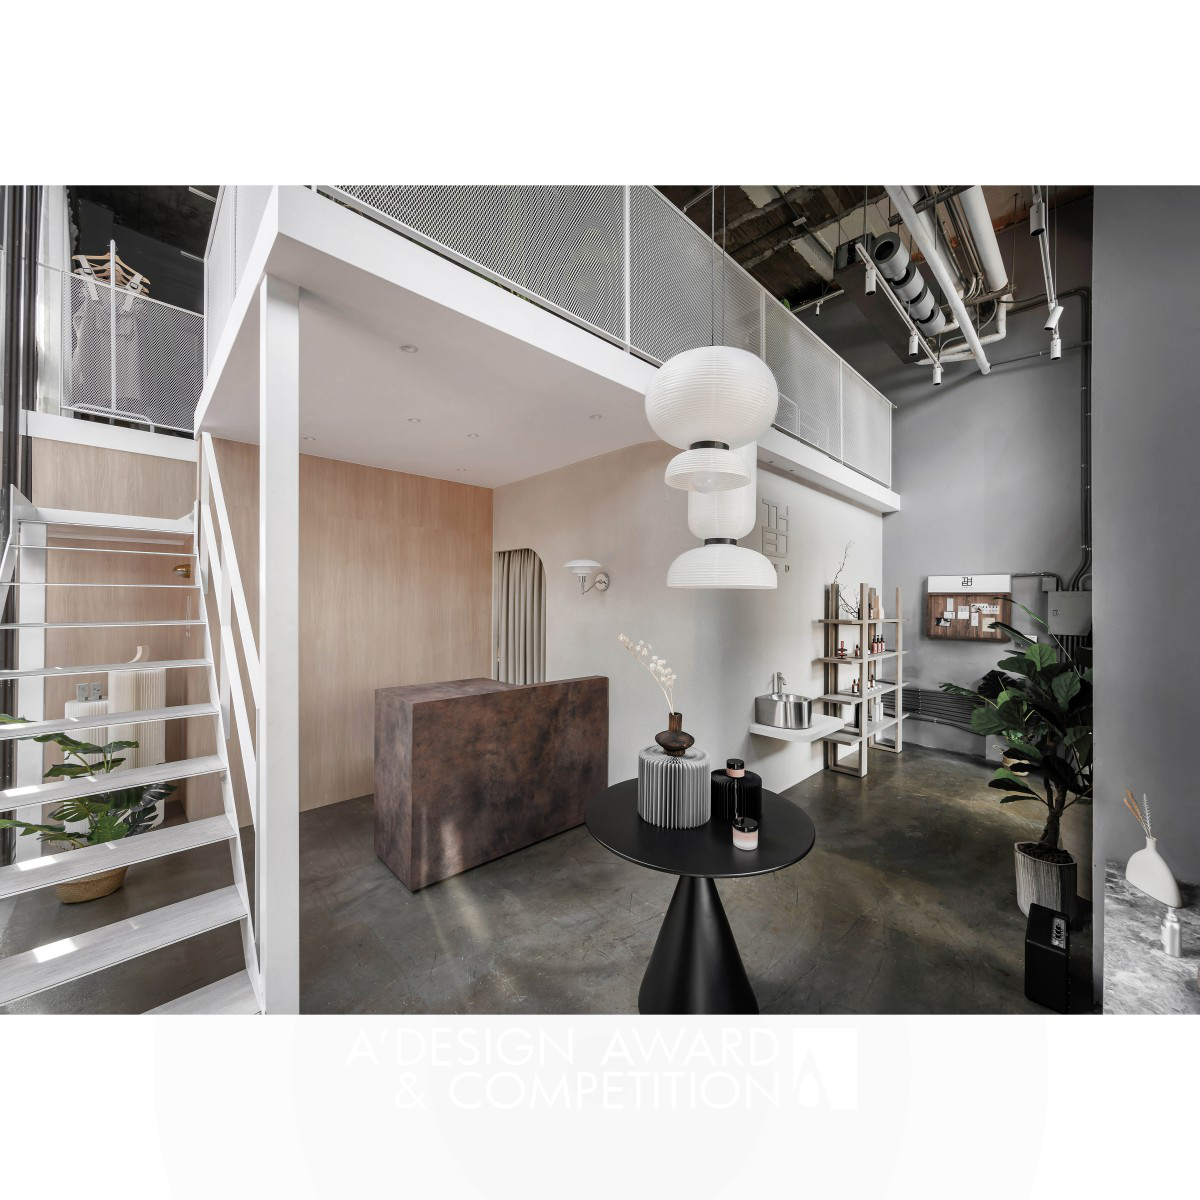 The D Showroom Commercial Space by Tzu-Chien Chiang